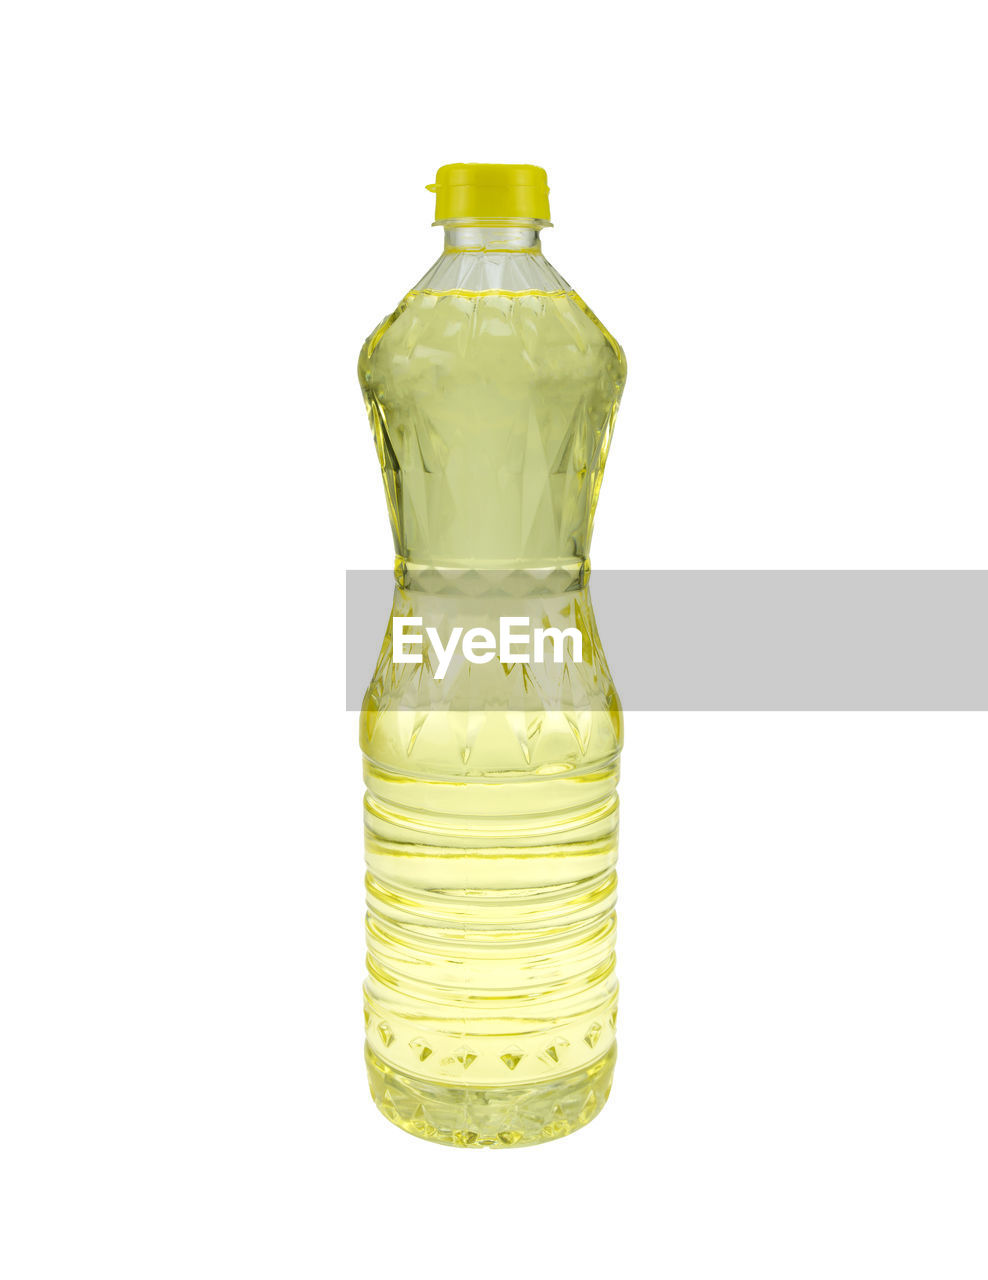 container, bottle, cut out, yellow, white background, studio shot, drinkware, glass bottle, glass, food and drink, indoors, no people, plastic bottle, single object, jar, copy space, refreshment, transparent, food, still life